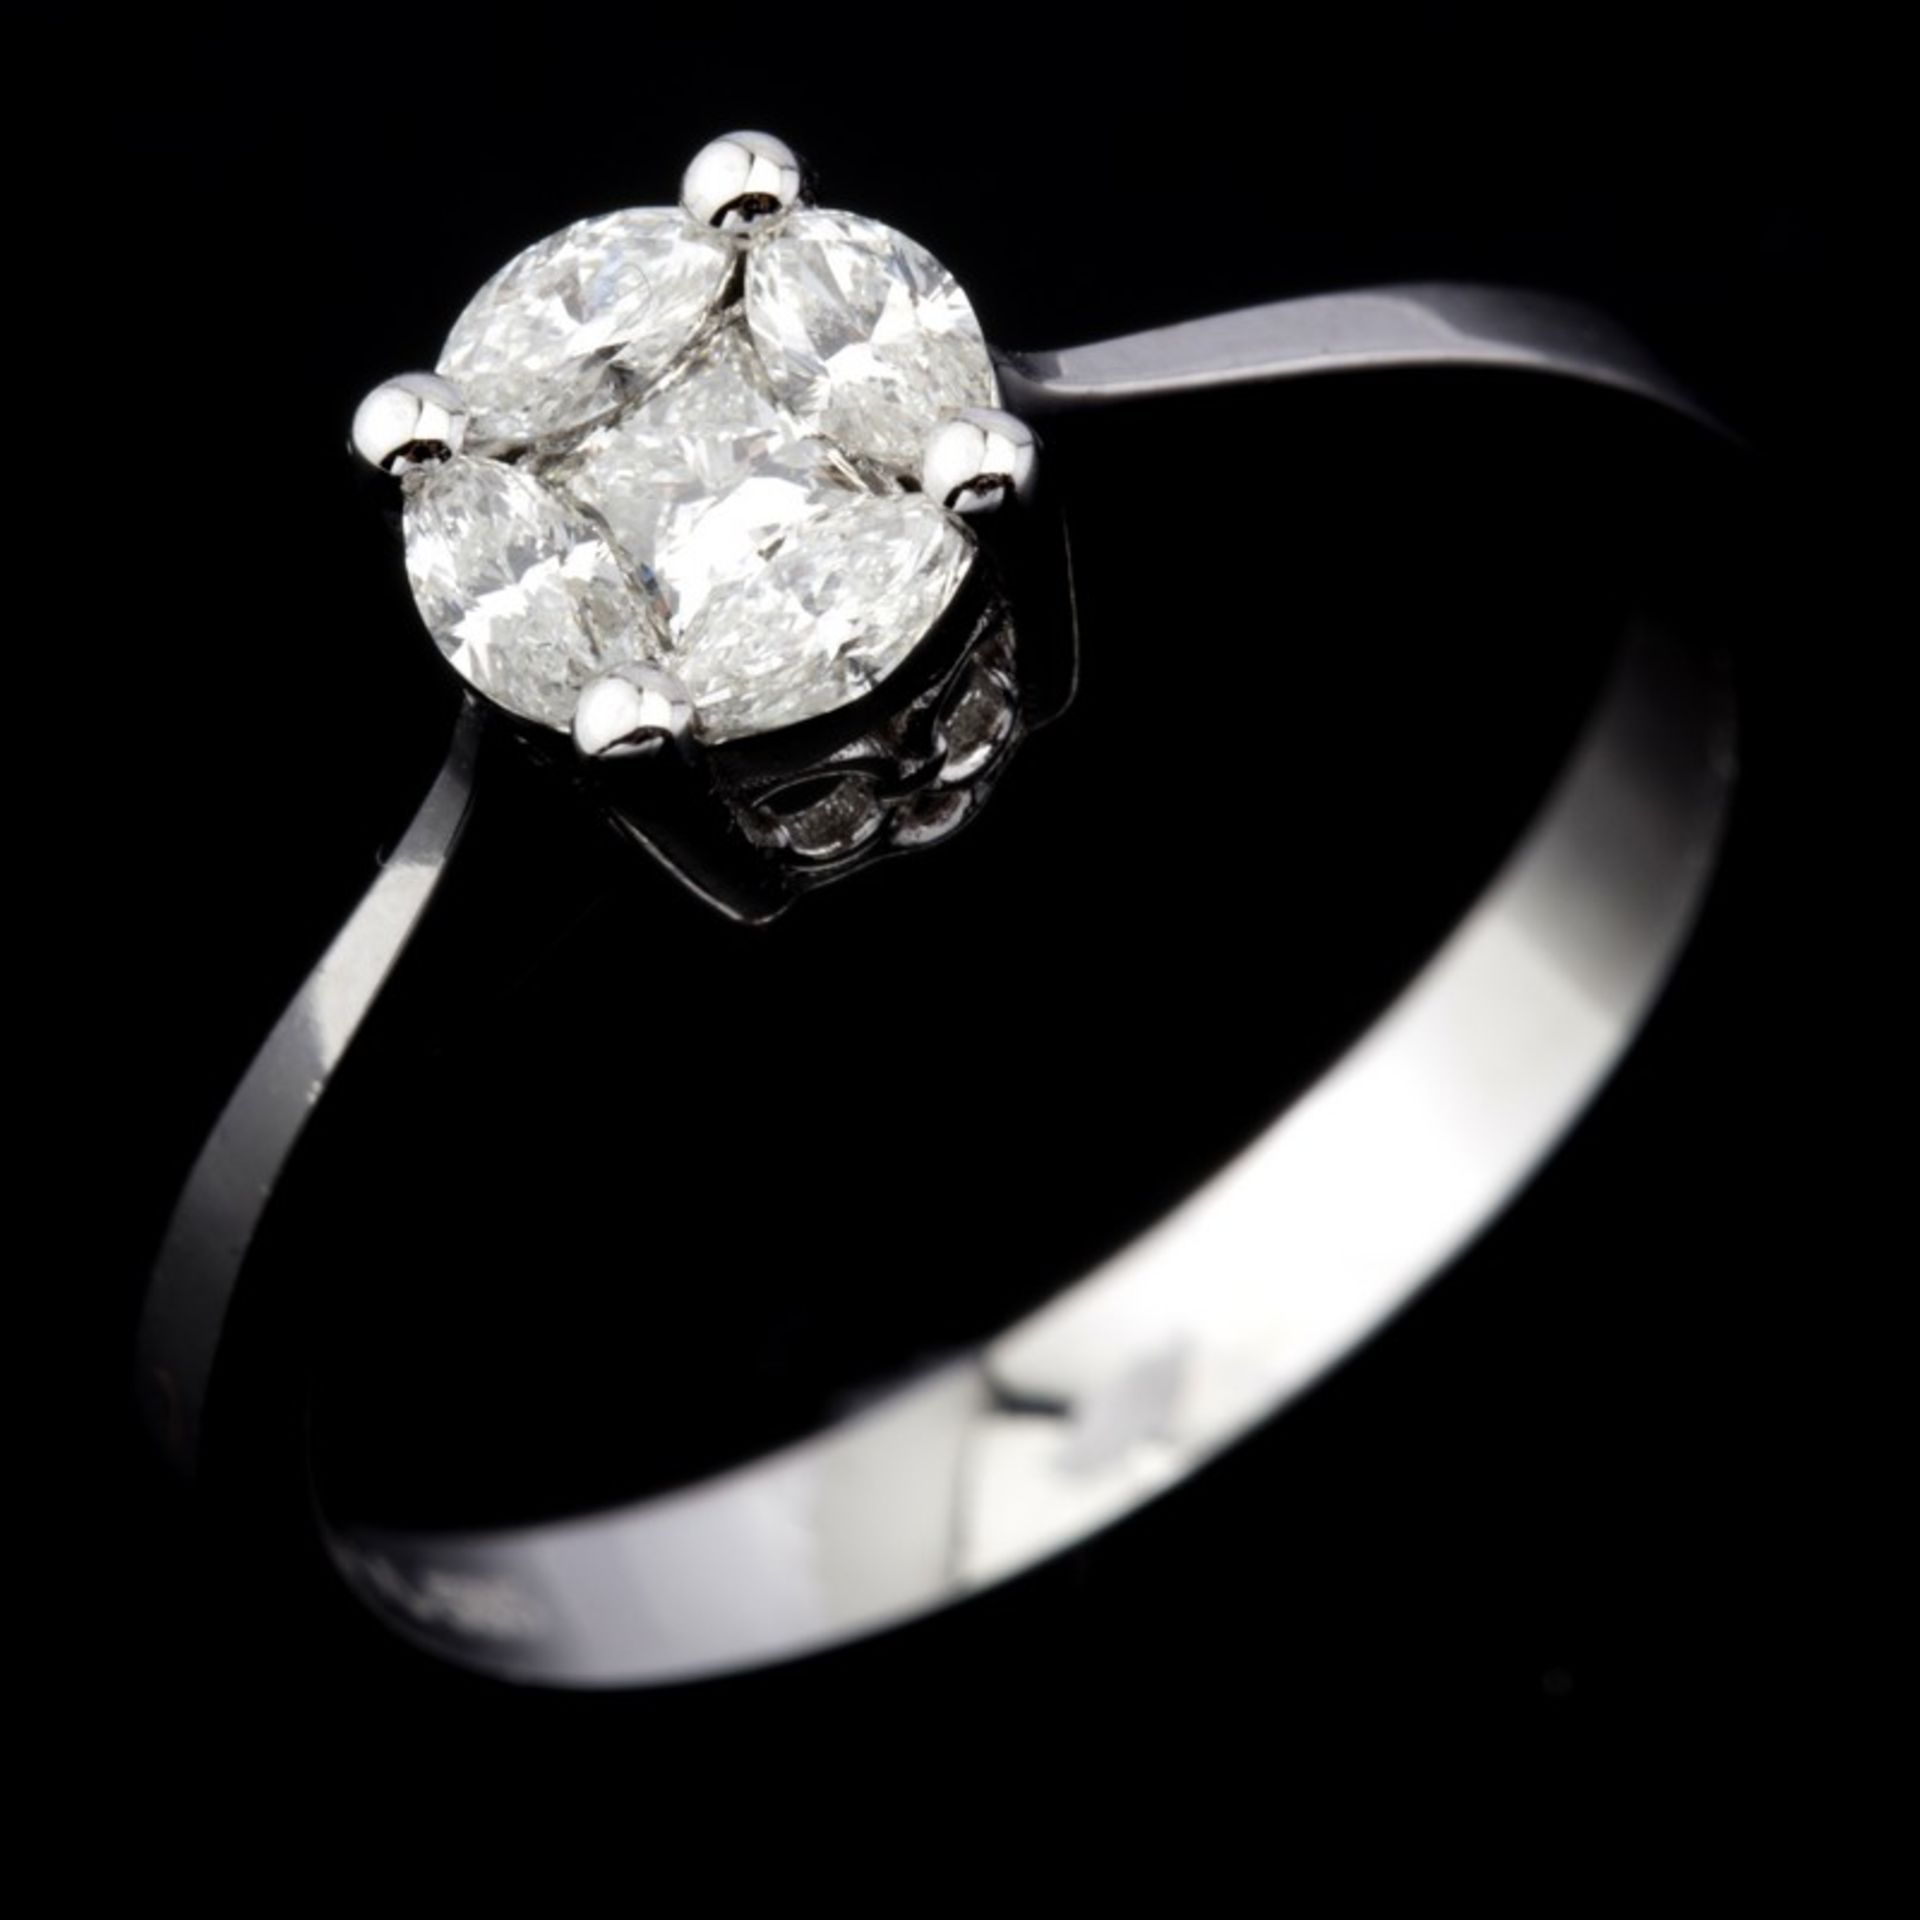 Certificated 14K White Gold Diamond Ring - Image 7 of 7